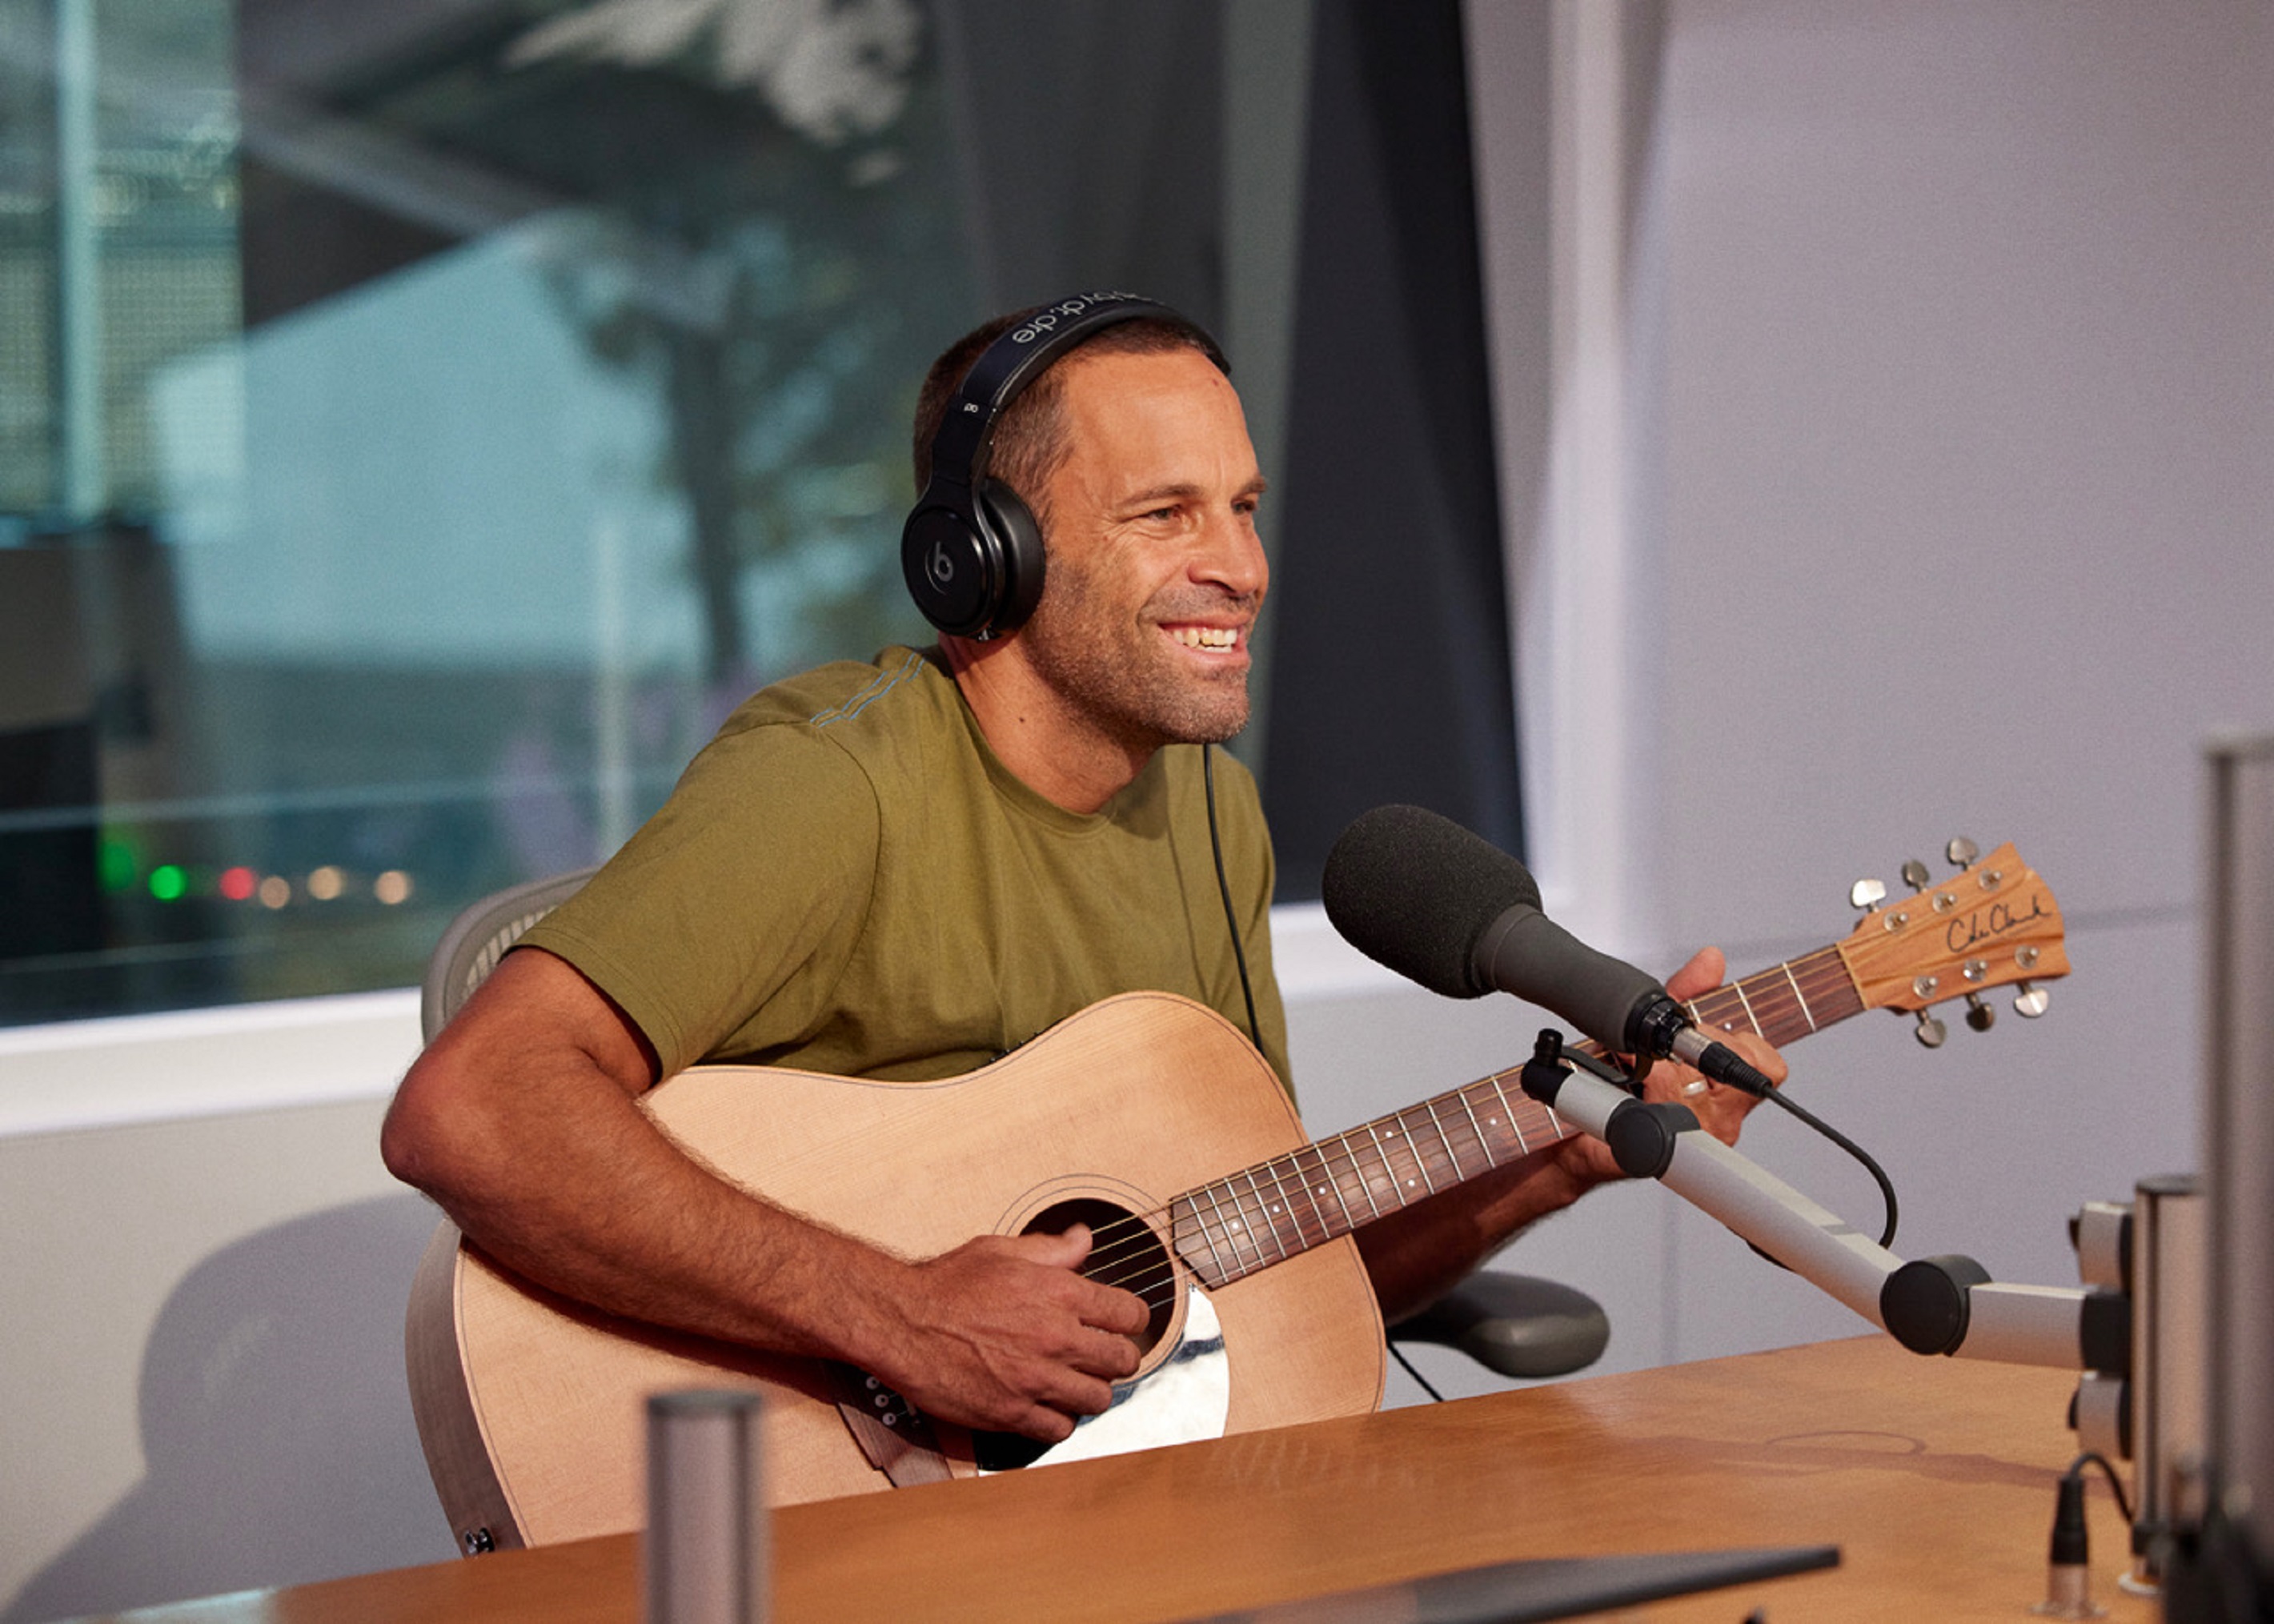 Jack Johnson Tells Apple Music About New Album 'Meet The Moonlight', Working With Blake Mills, Hearing His Music in Public, and More